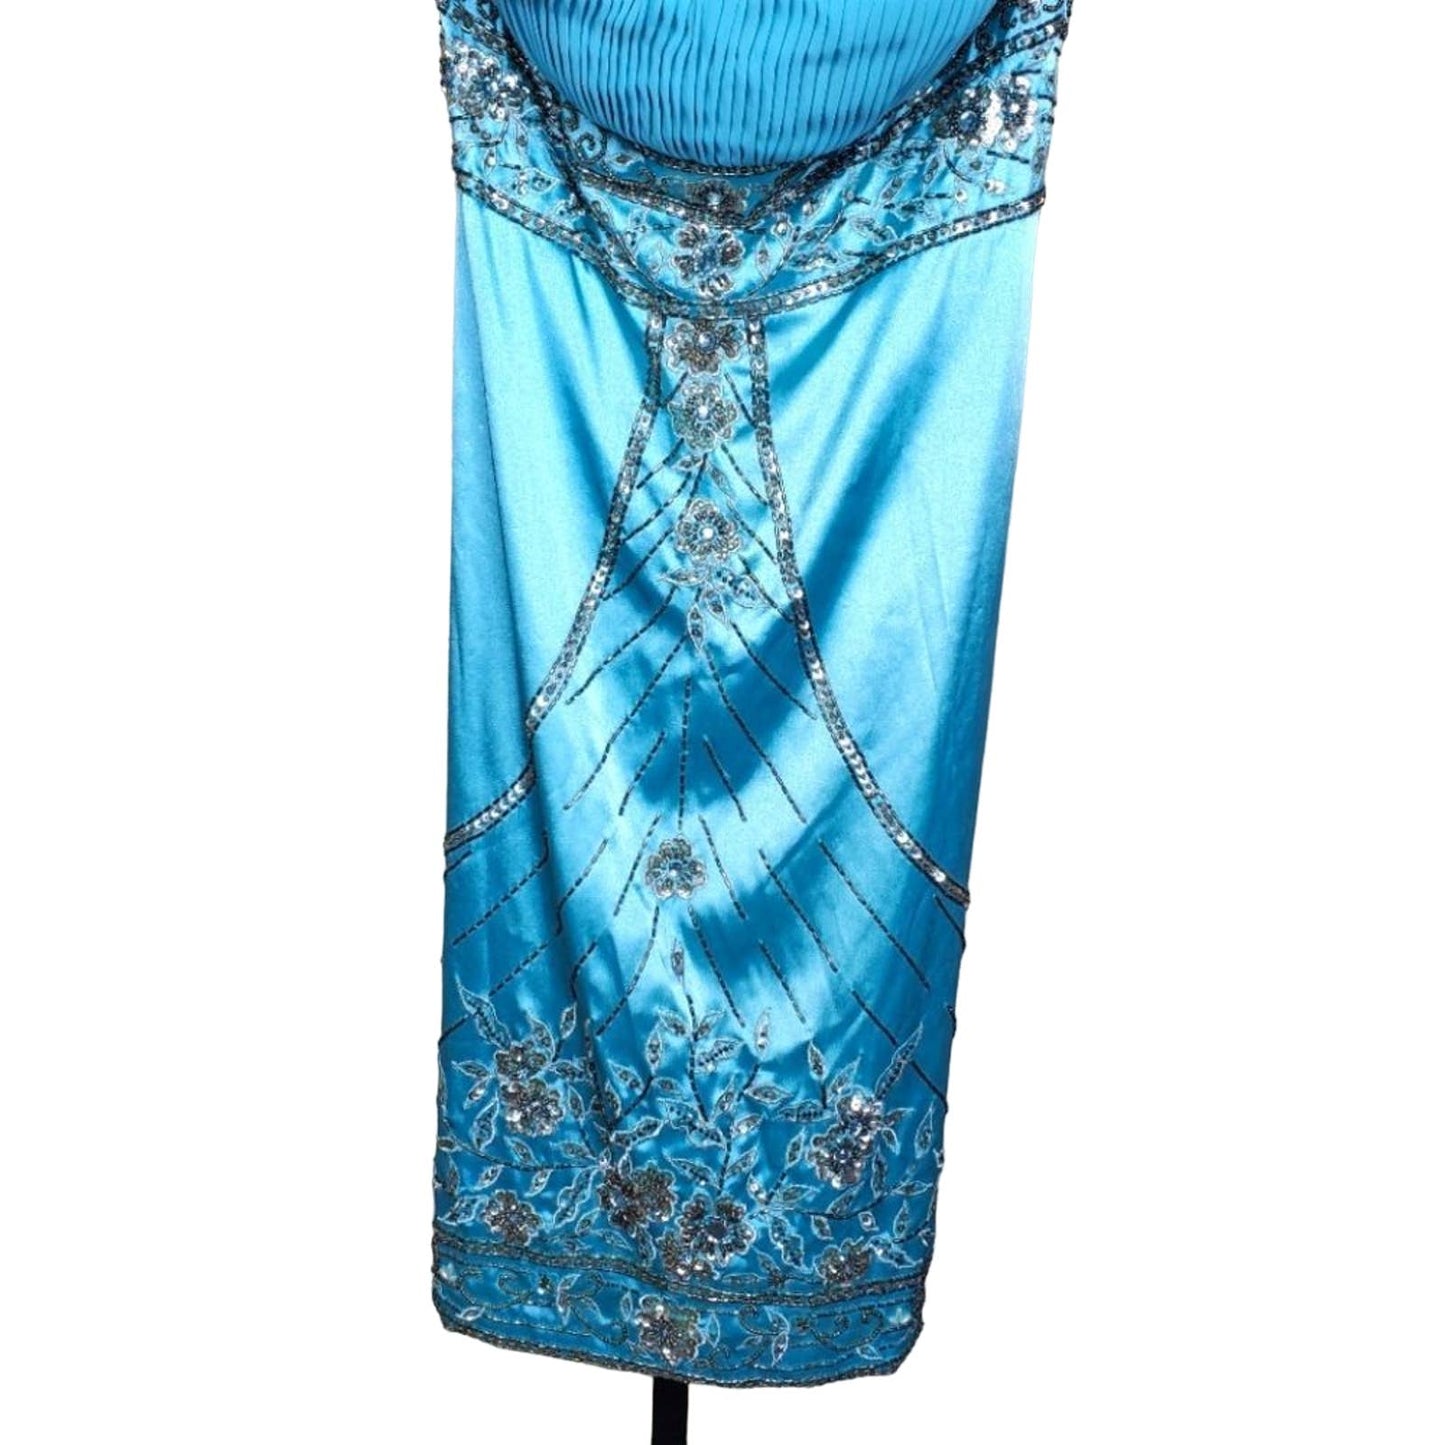 NEW Sue Wong Strapless Beaded Embroidered Blue Dress, Size 2